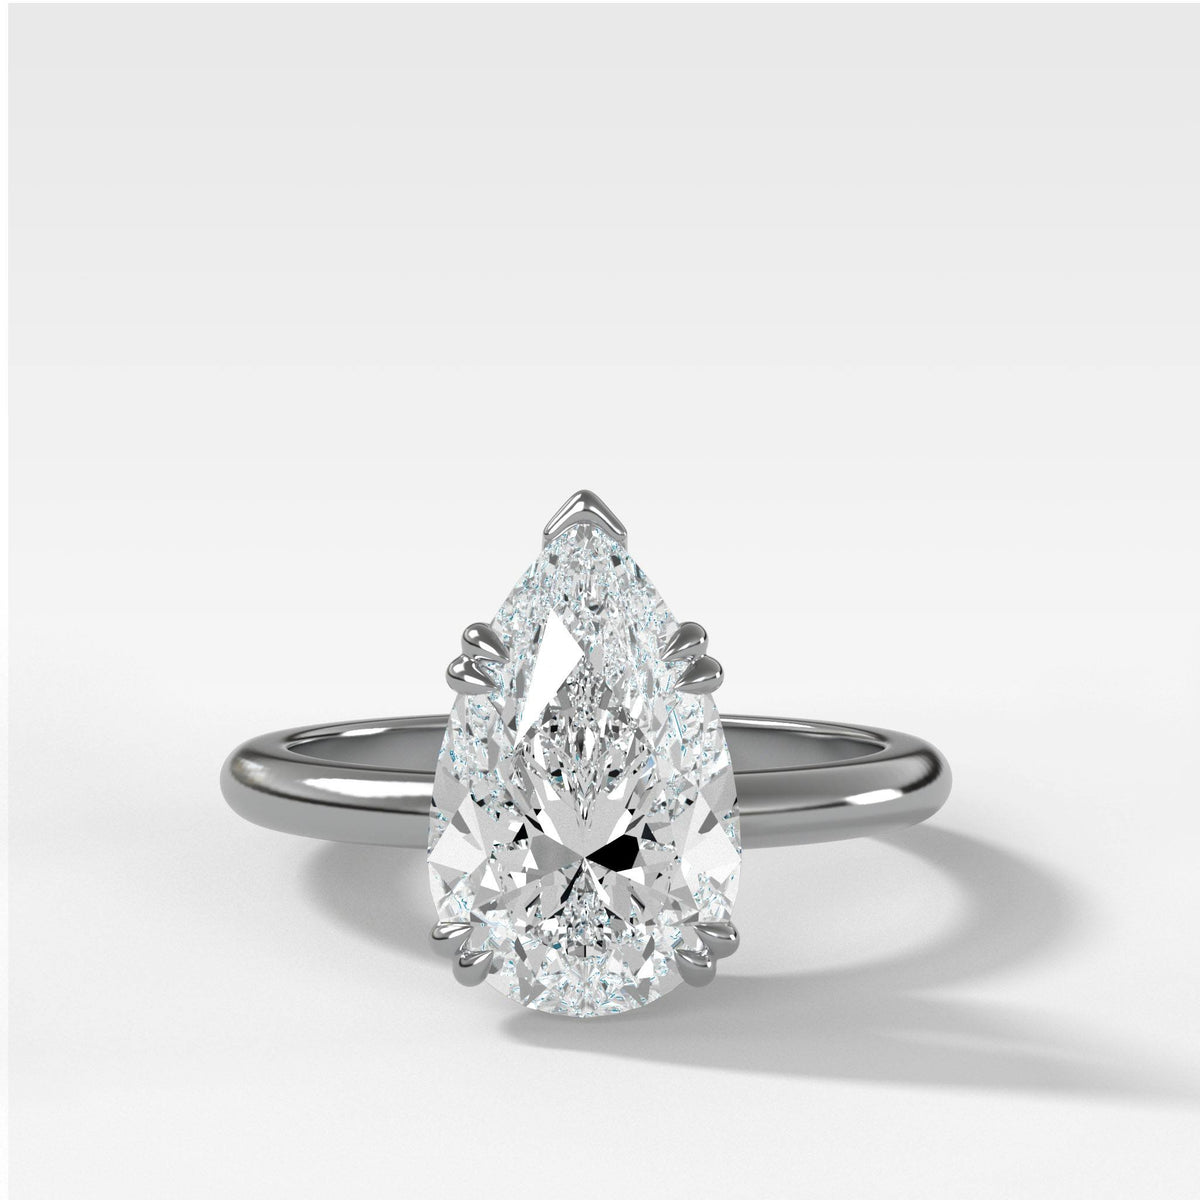 The Signature Pear Engagement Ring | 18K White Gold Pave